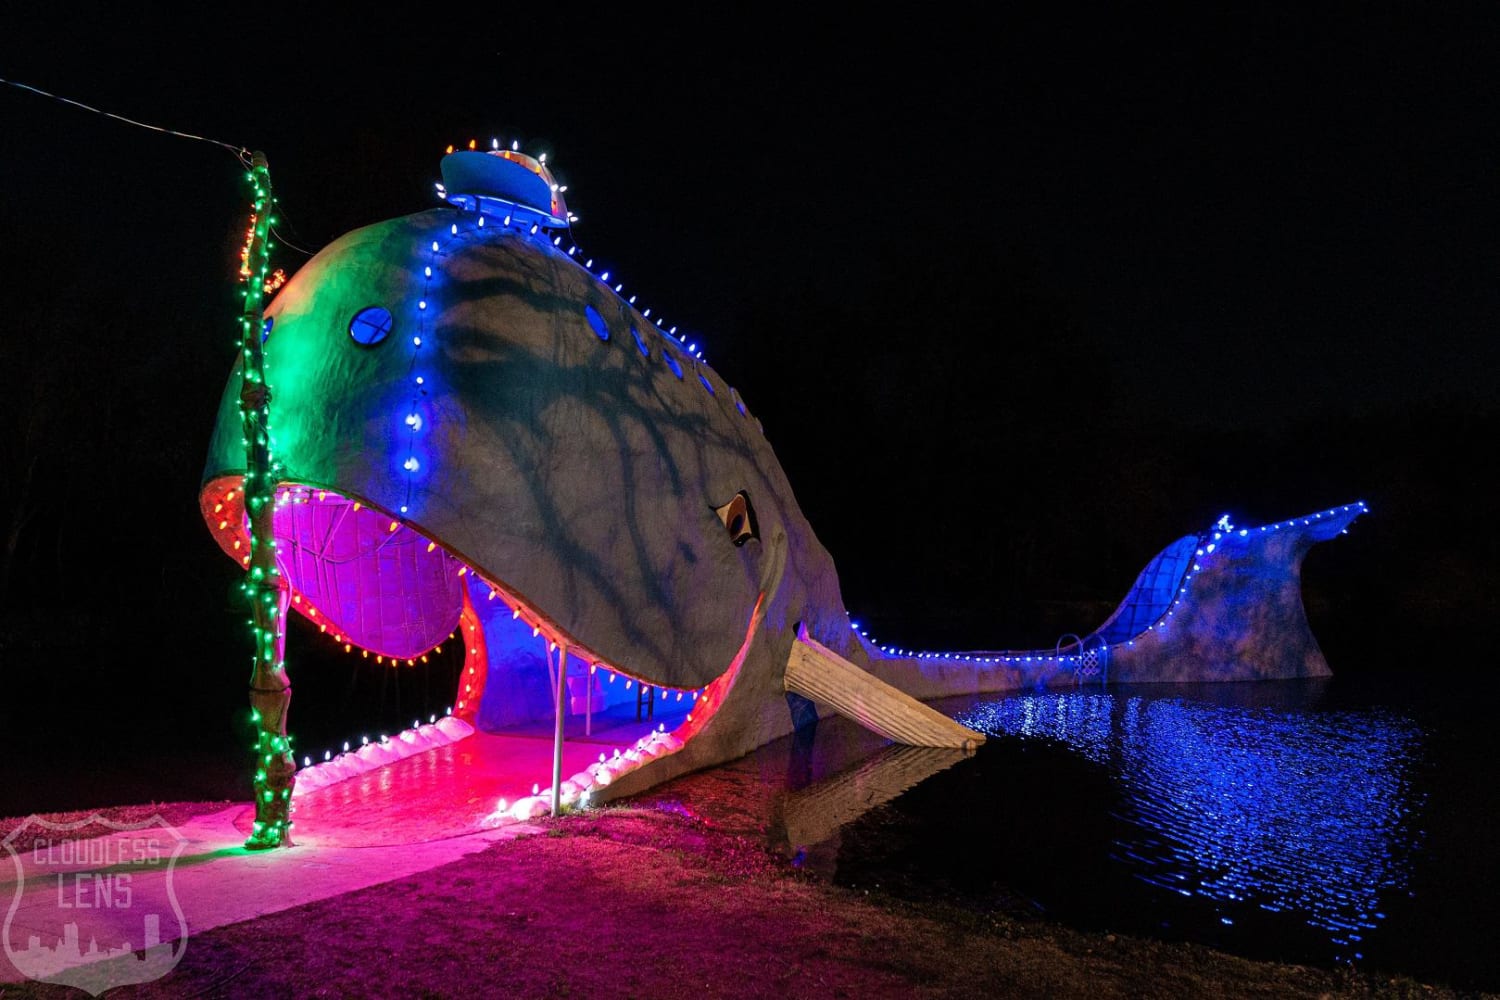 The Blue Whale of Catoosa, OK lit up for Christmas